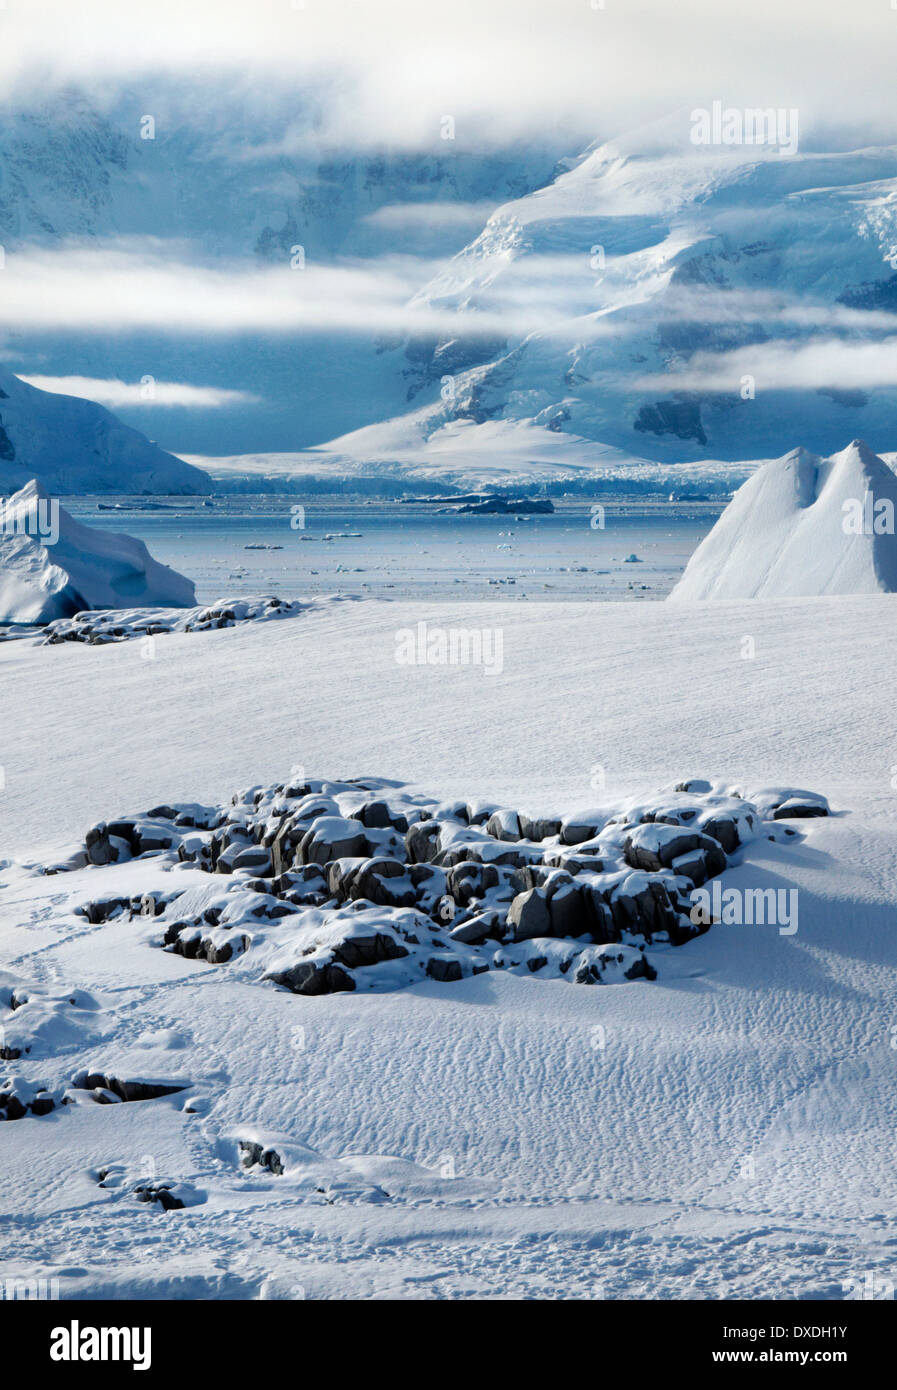 A view across the frozen landscape of Charlotte Bay in Antarctica Stock Photo